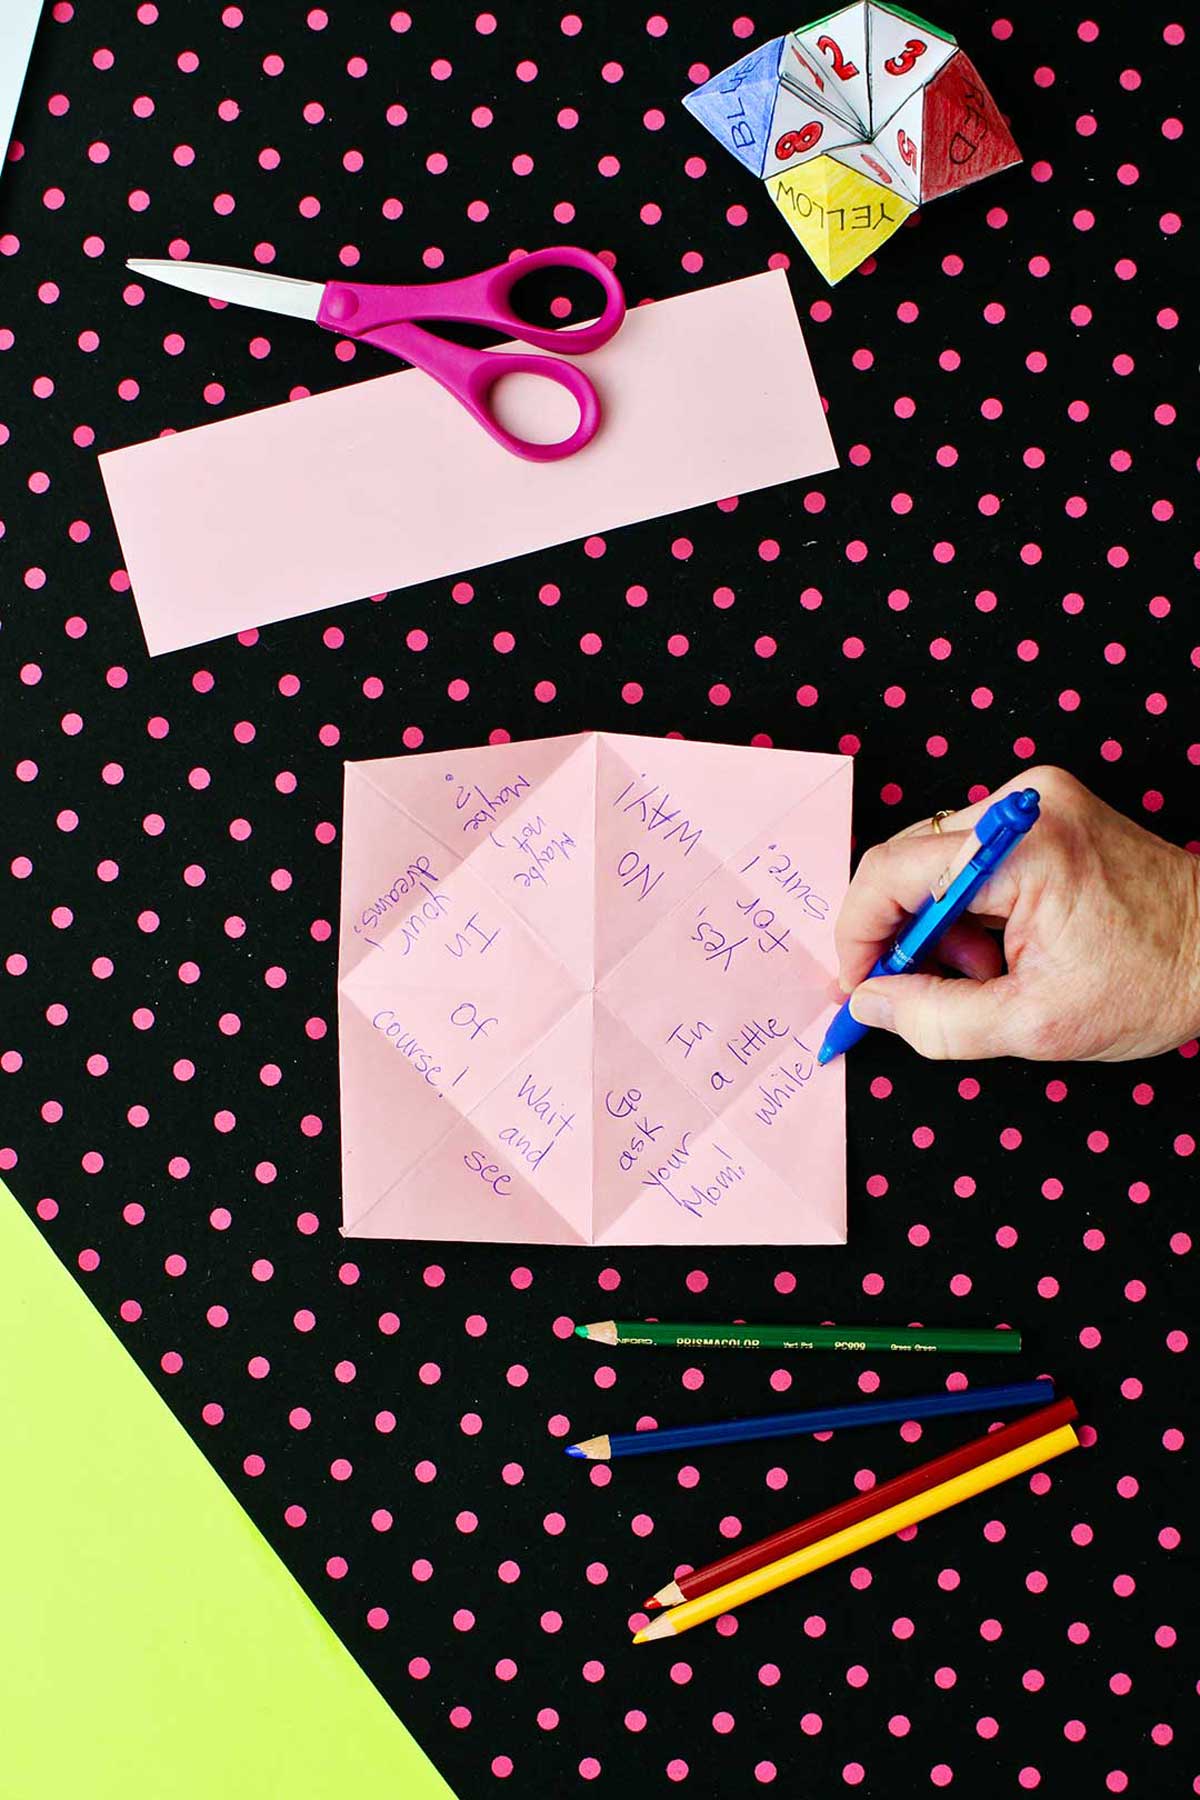 Unfolded square pink paper with all the options for fortunes for the paper fortune teller with scissors and colored pencils laying on a black and pink polka dotted background.